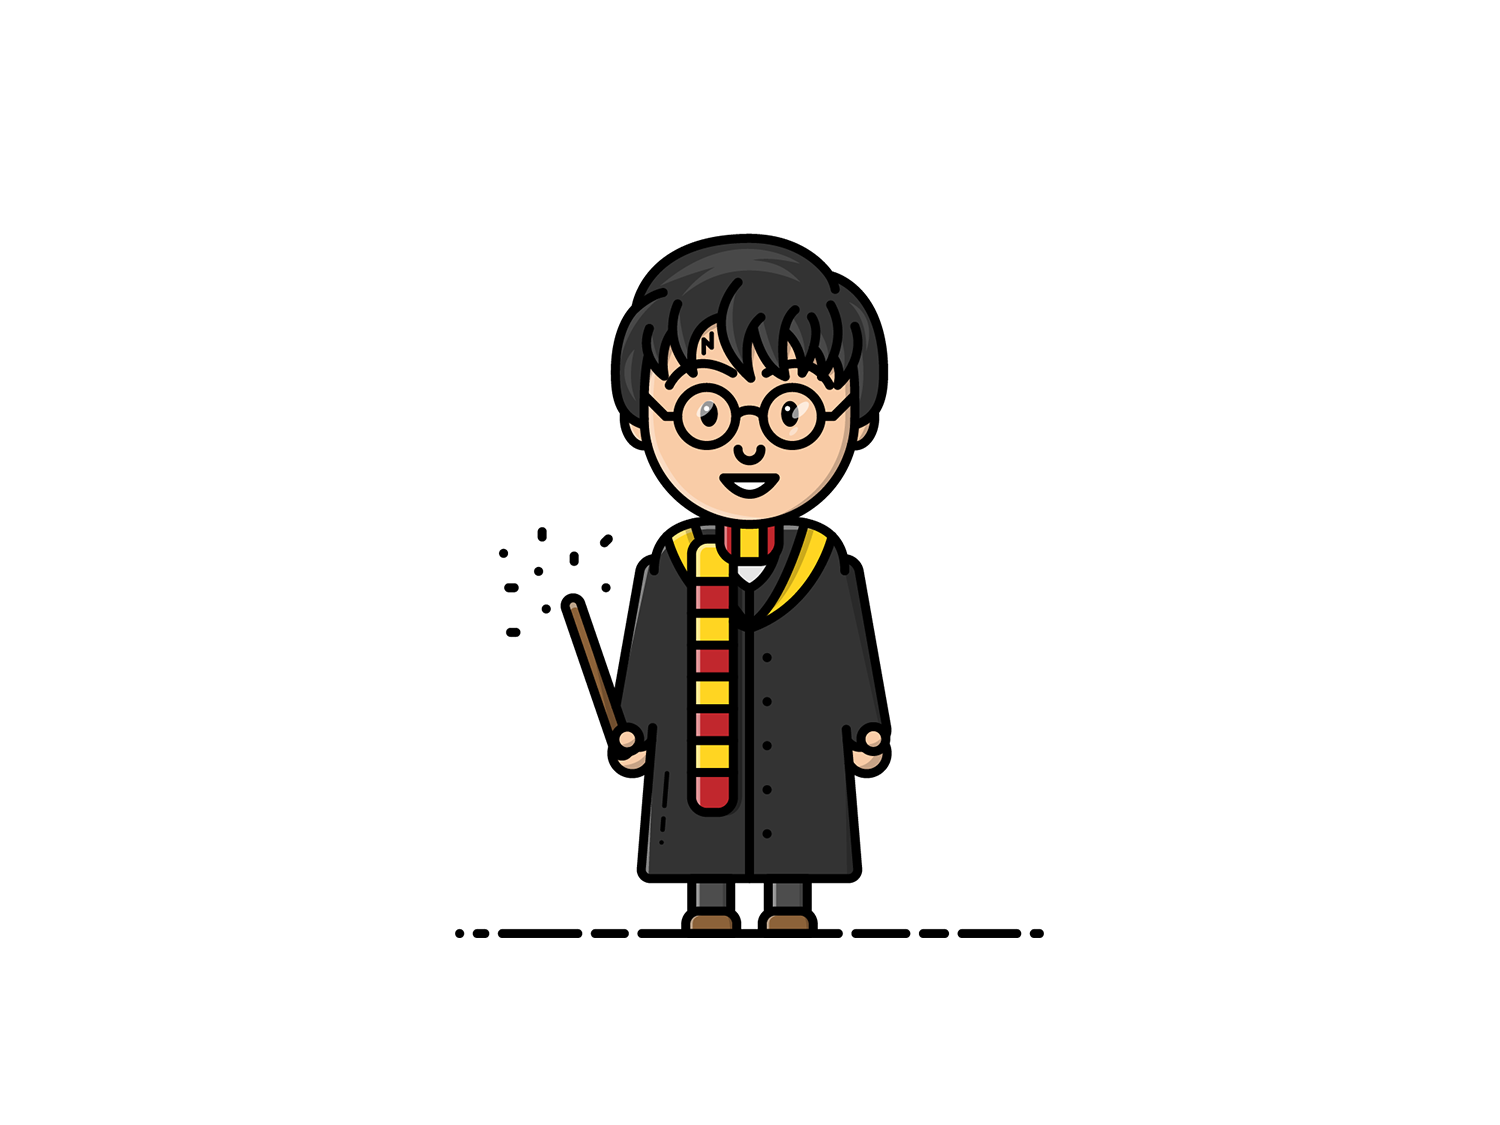 Harry Potter - Vector Illustration by Geoffrey Humbert on Dribbble